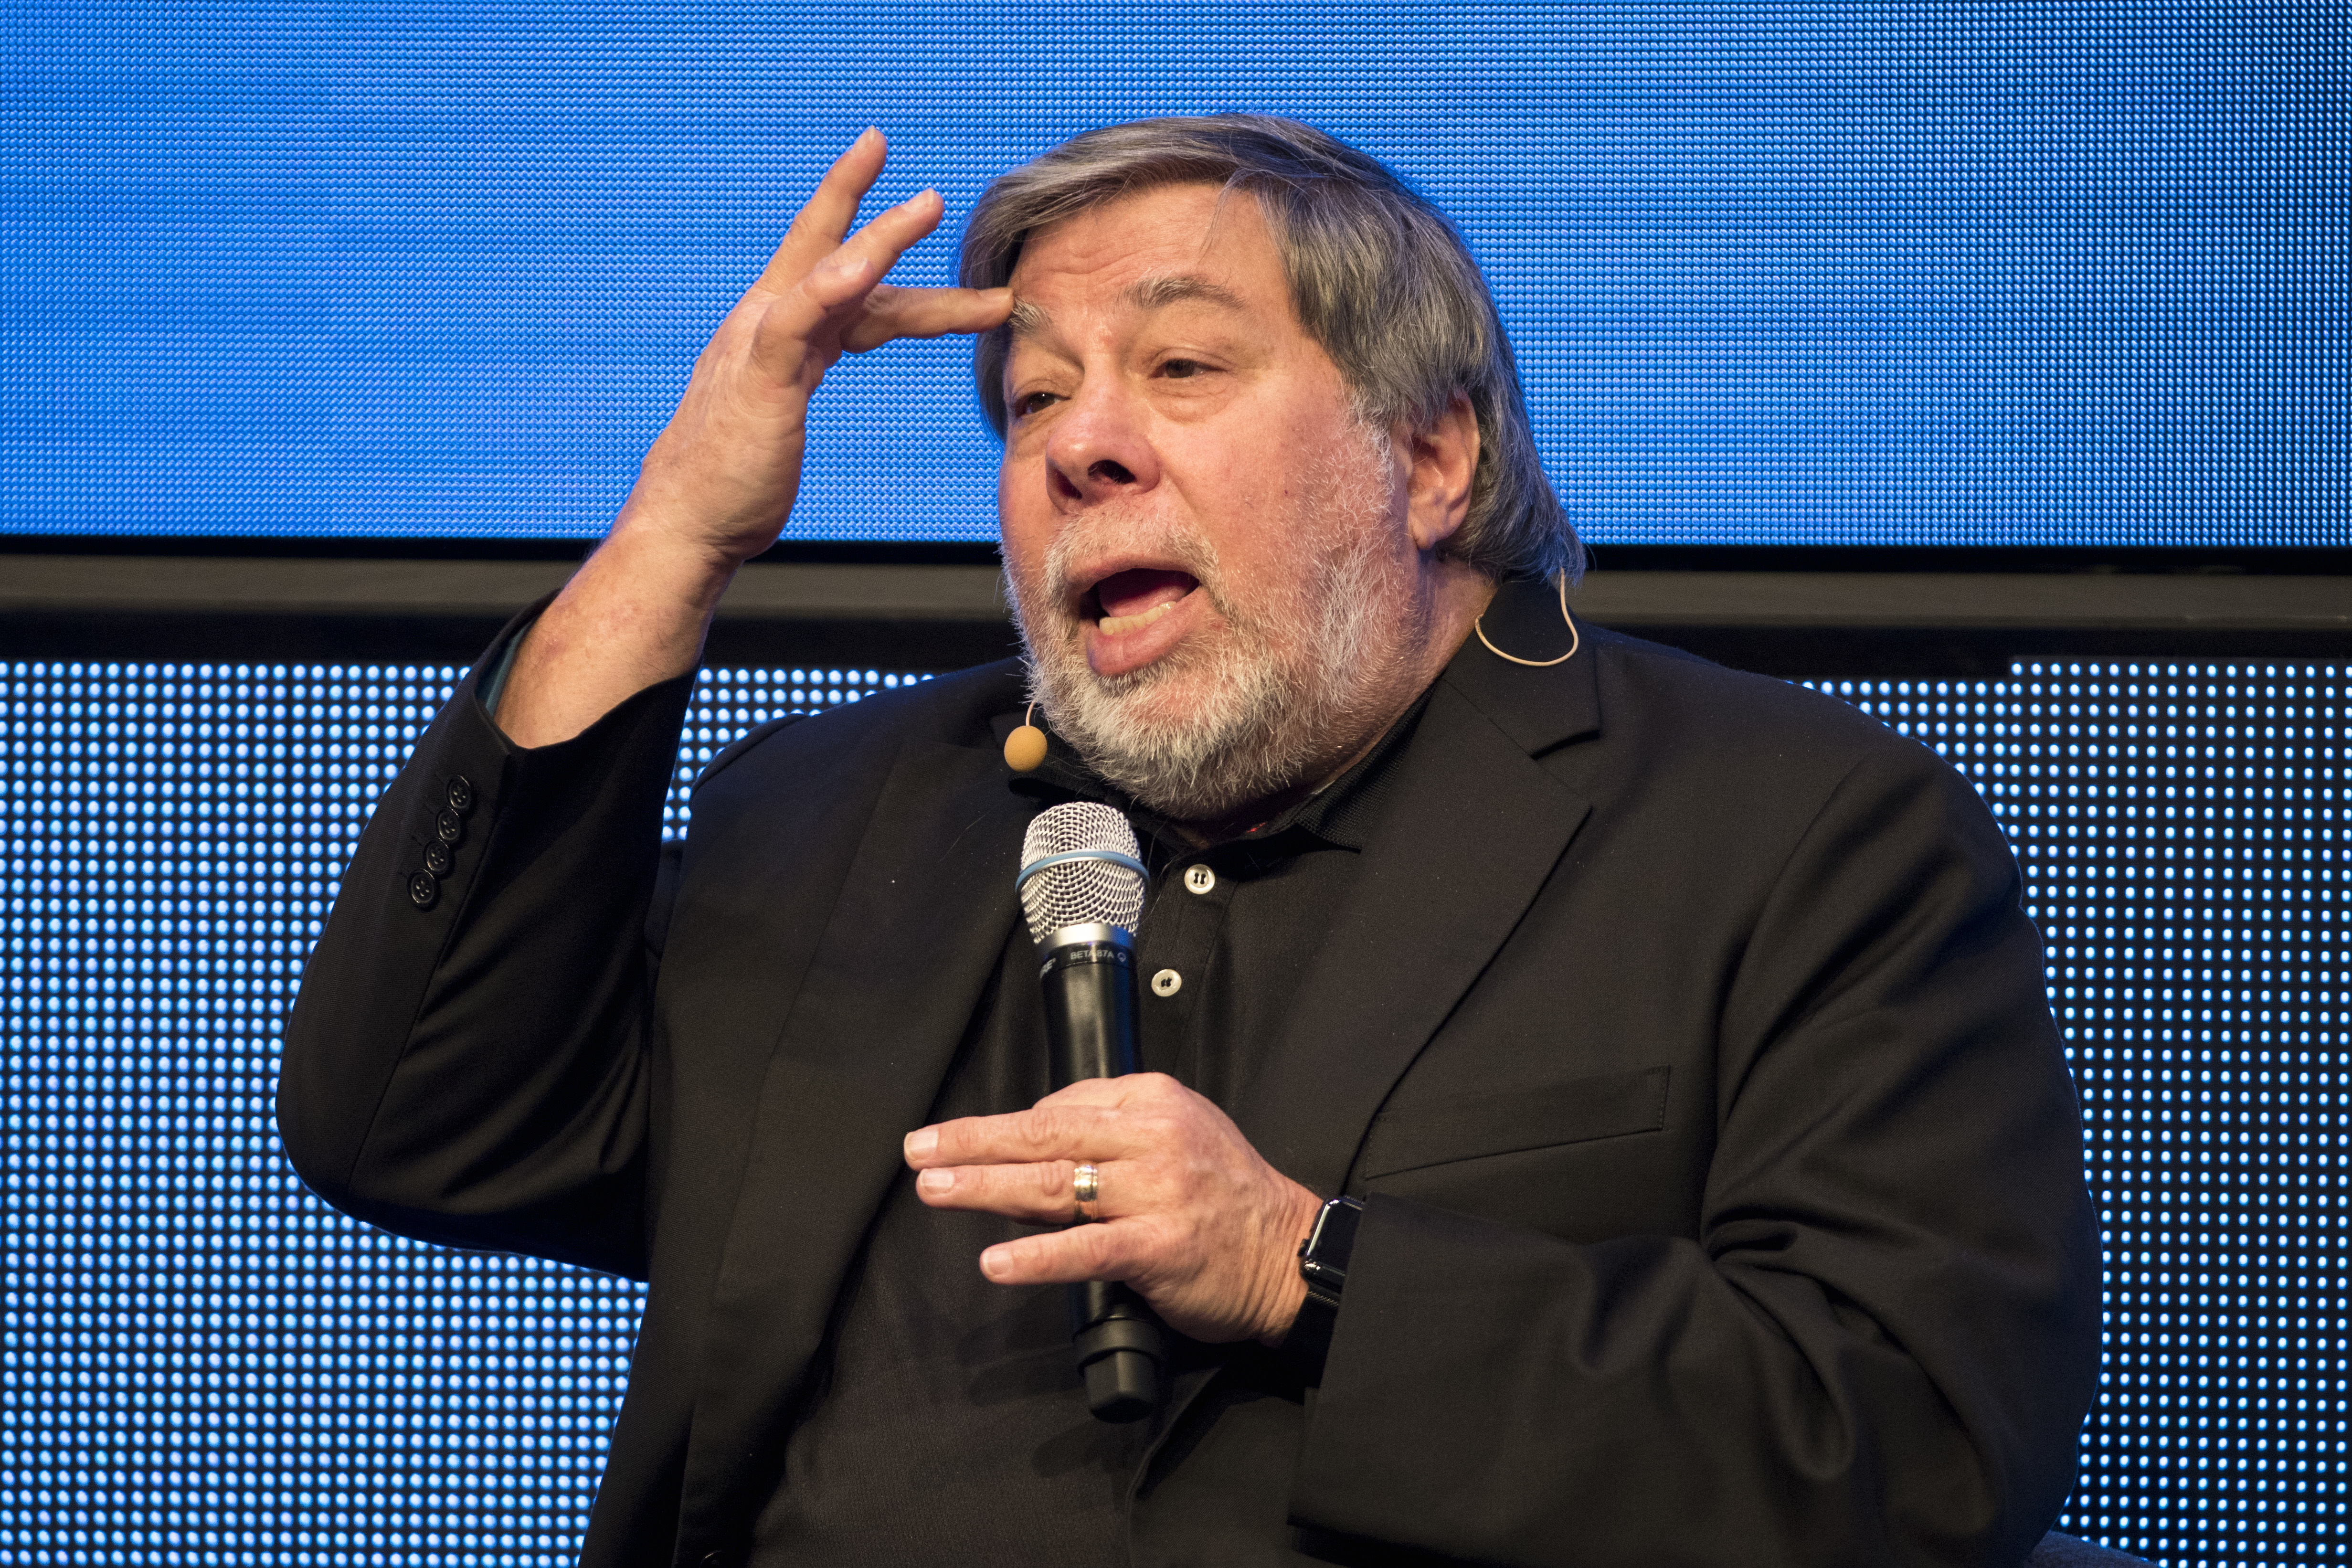 Steve Wozniak Says He Was Scammed Out of $70,000 Worth of Bitcoin